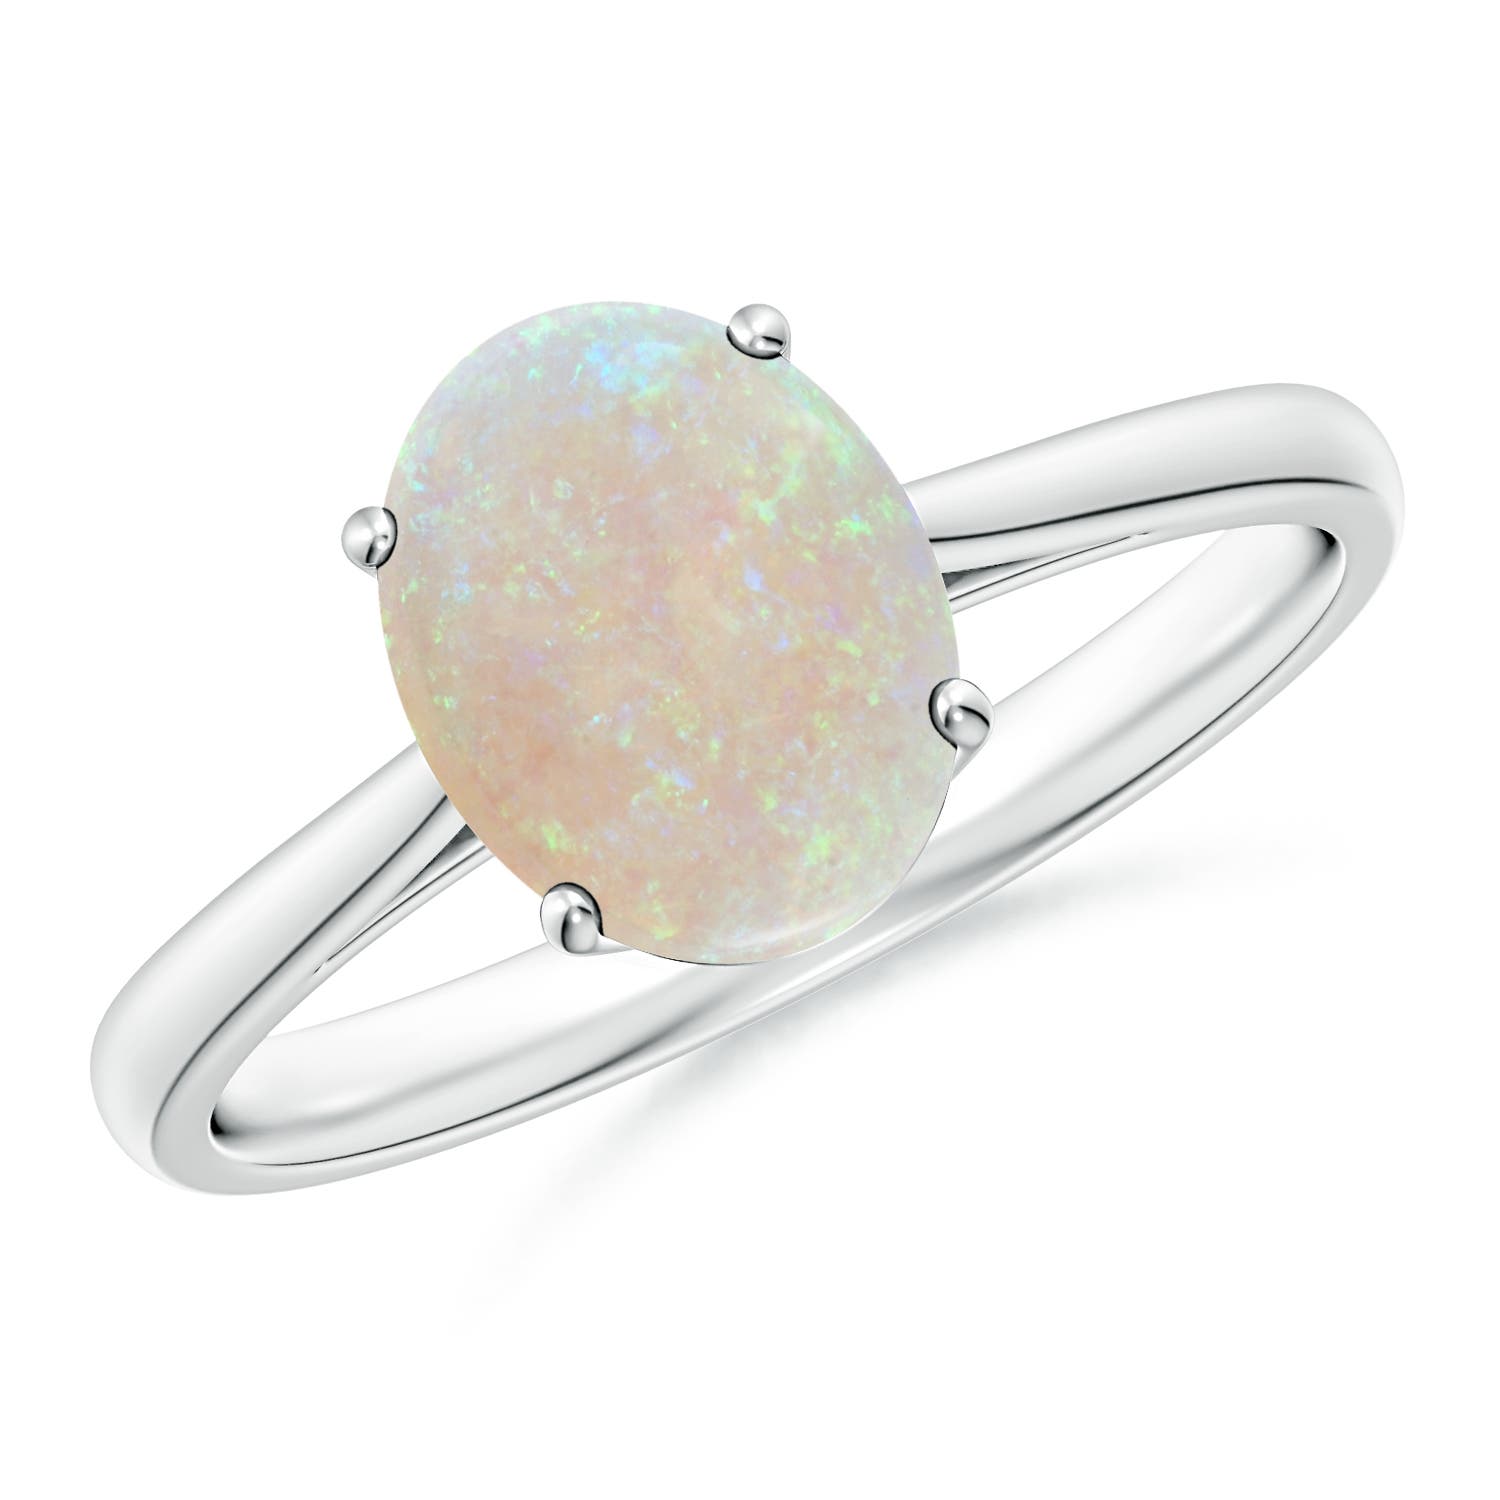 AA - Opal / 1.1 CT / 14 KT White Gold